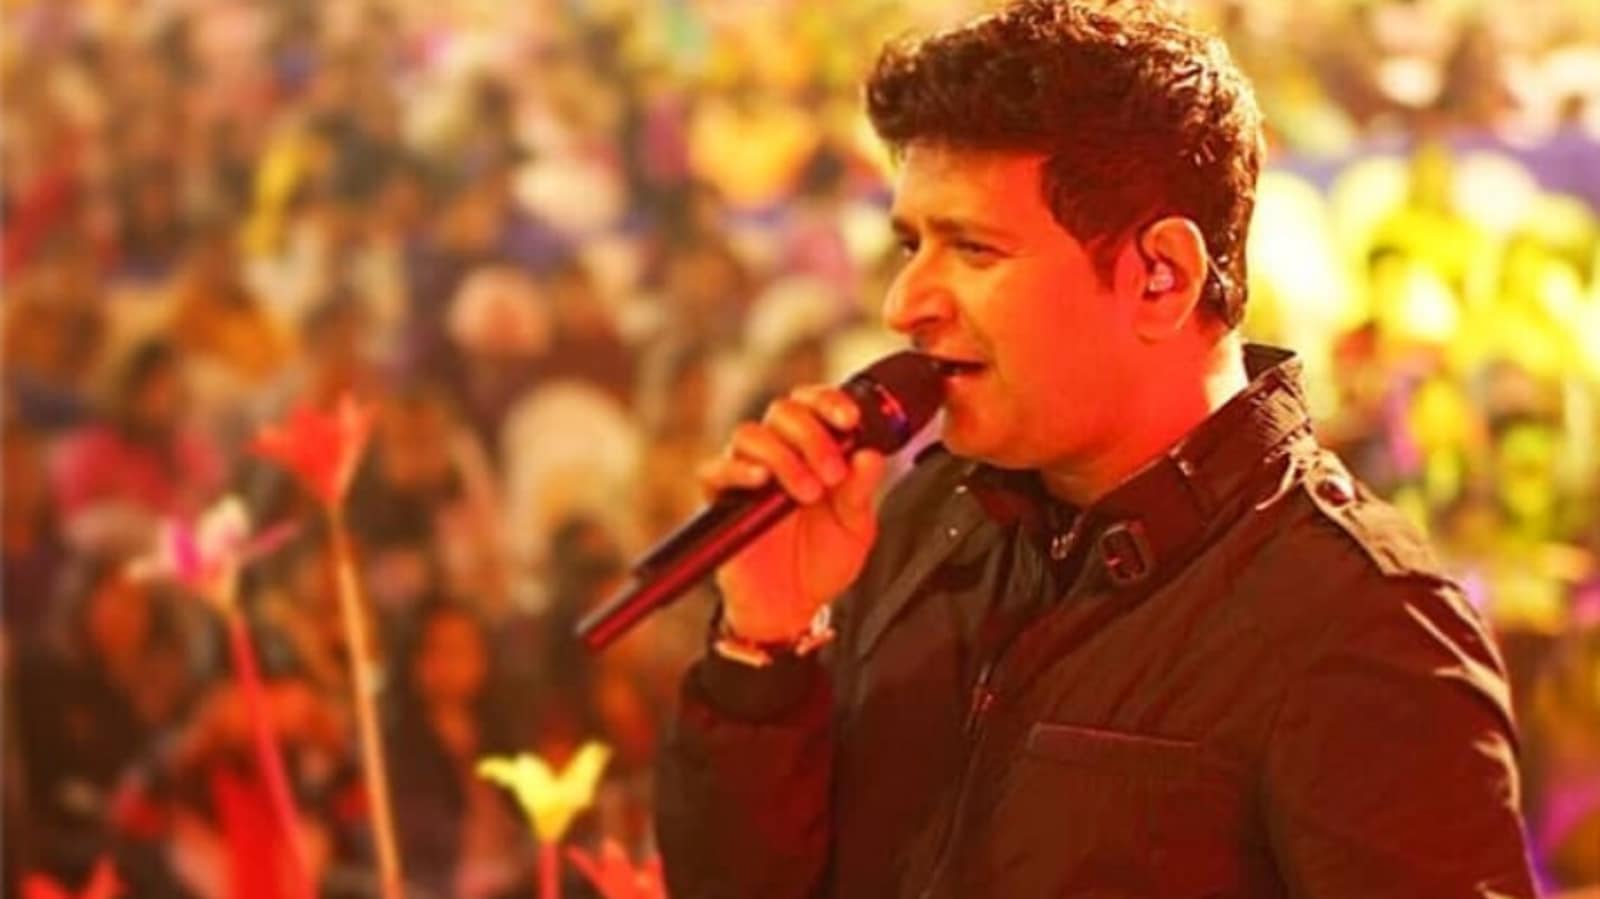 singer-kk-dies-at-53-after-live-performance-in-kolkata-the-voice-of-love-is-gone